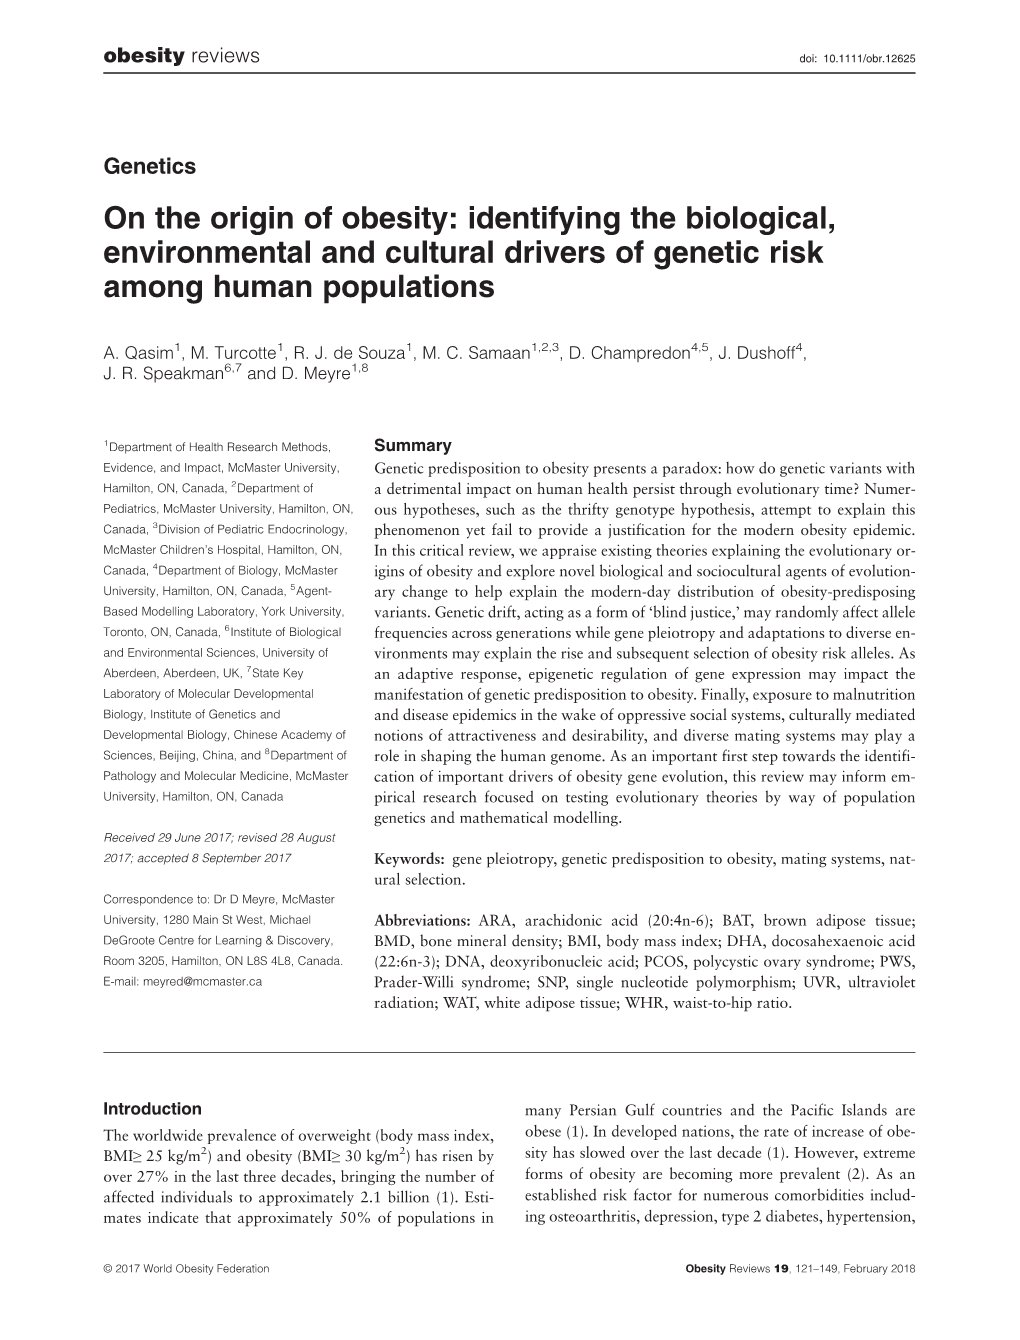 On the Origin of Obesity: Identifying the Biological, Environmental and Cultural Drivers of Genetic Risk Among Human Populations